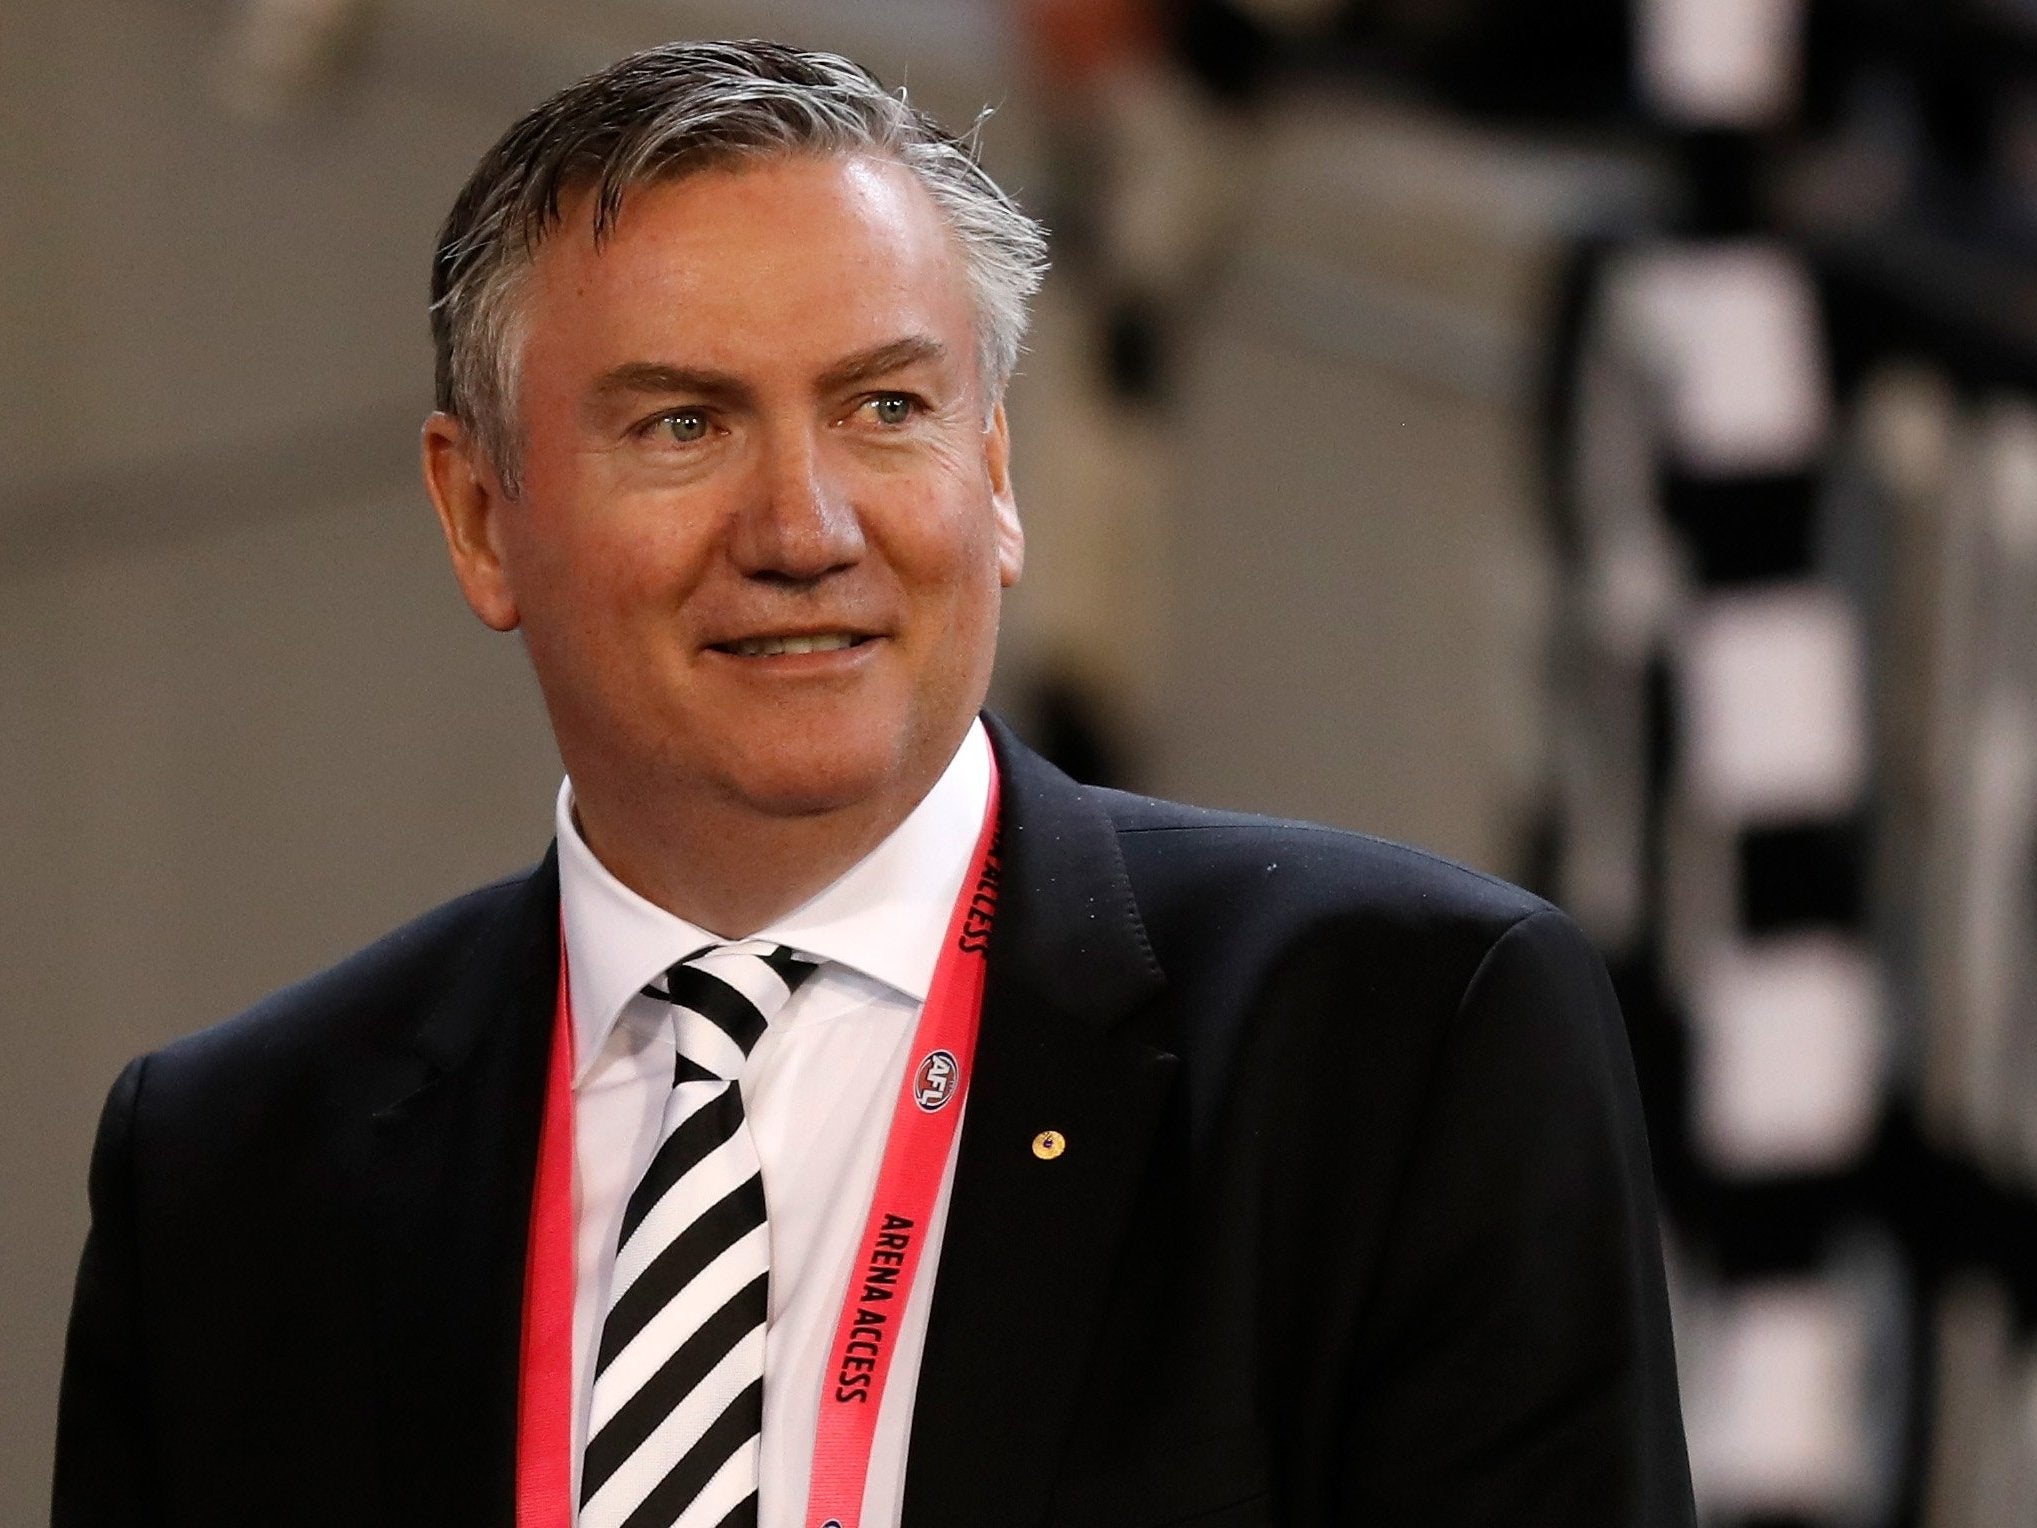 Eddie McGuire, who is also president of Collingwood Magpies, has a long history of on-air controversies